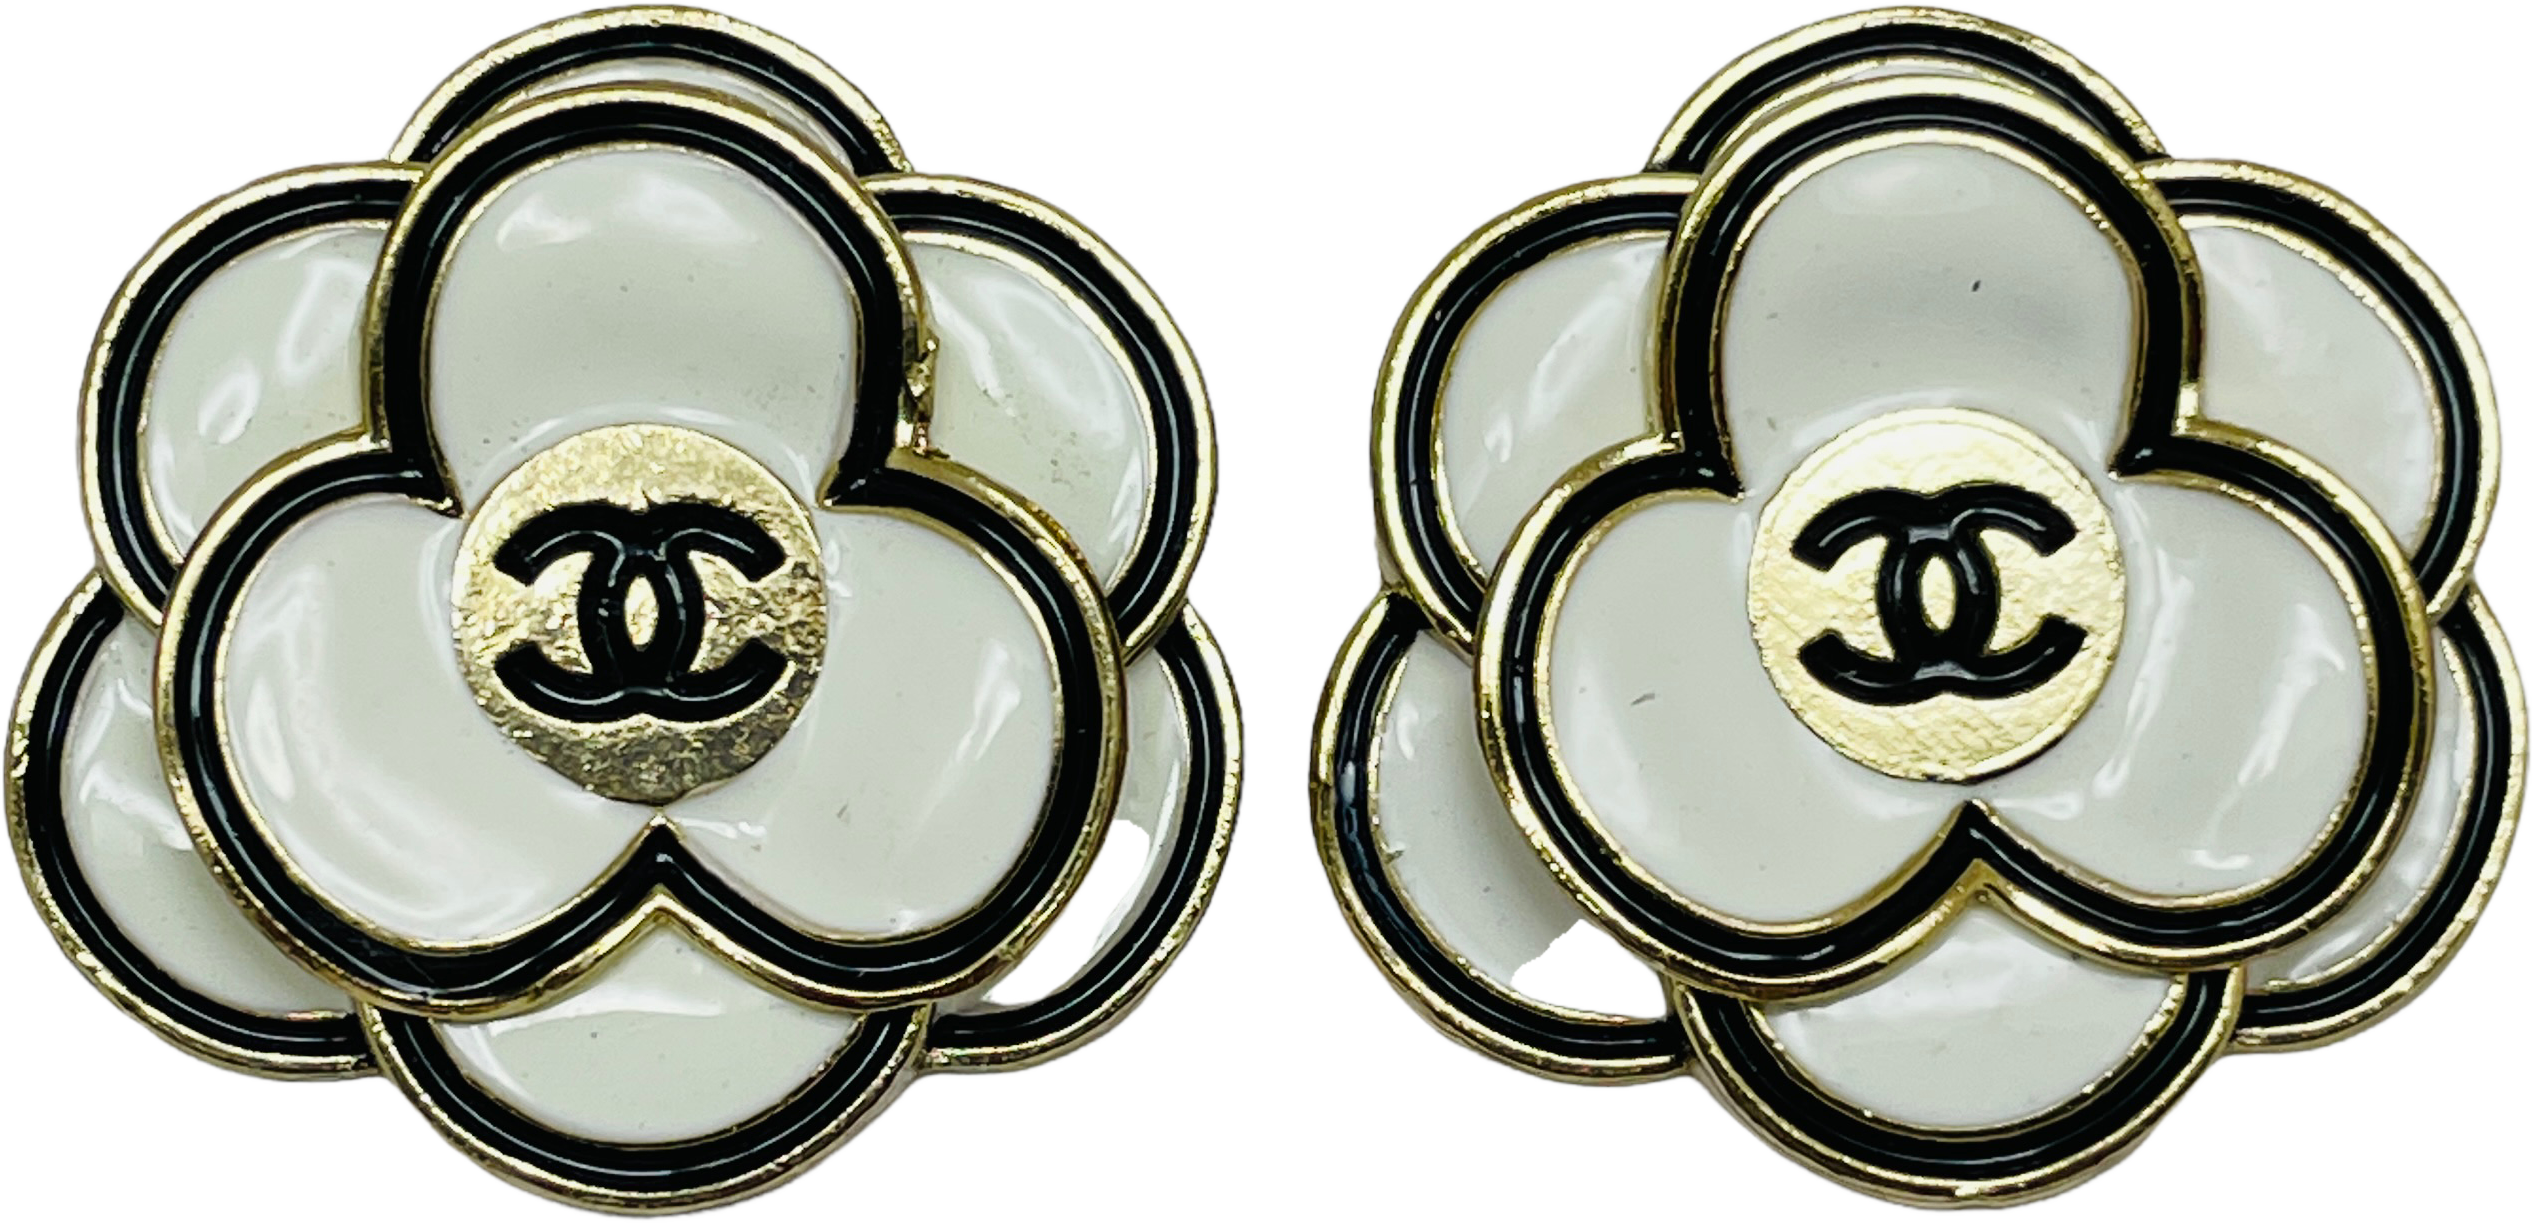 Vintage Chanel Cc Camellia White Recycled Buttons Earrings